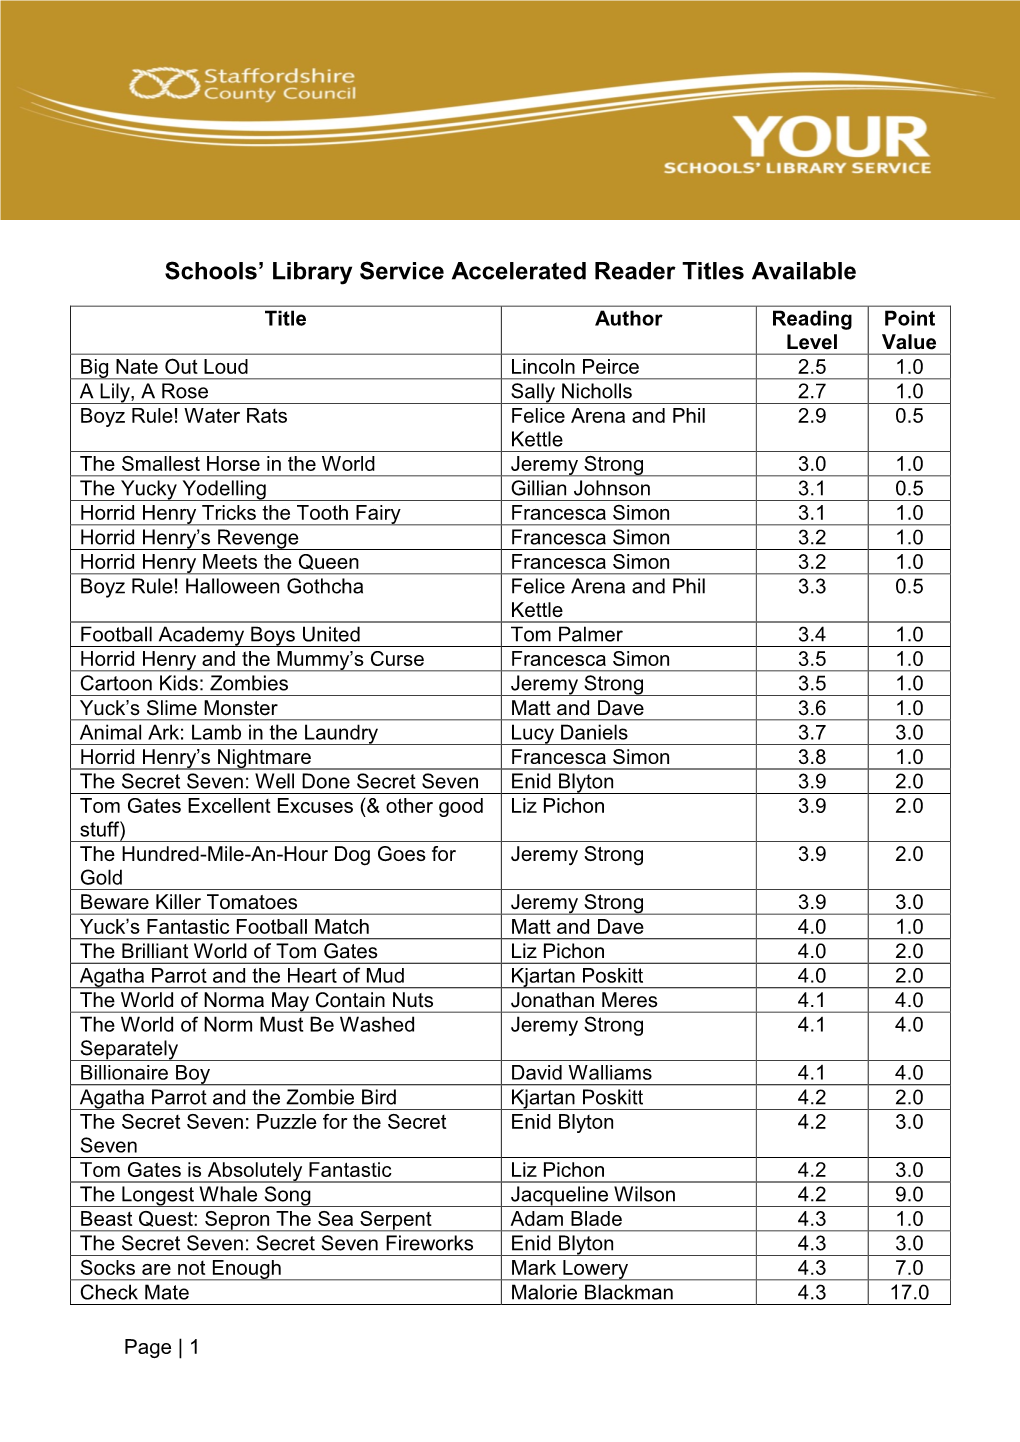 Schools' Library Service Accelerated Reader Titles Available